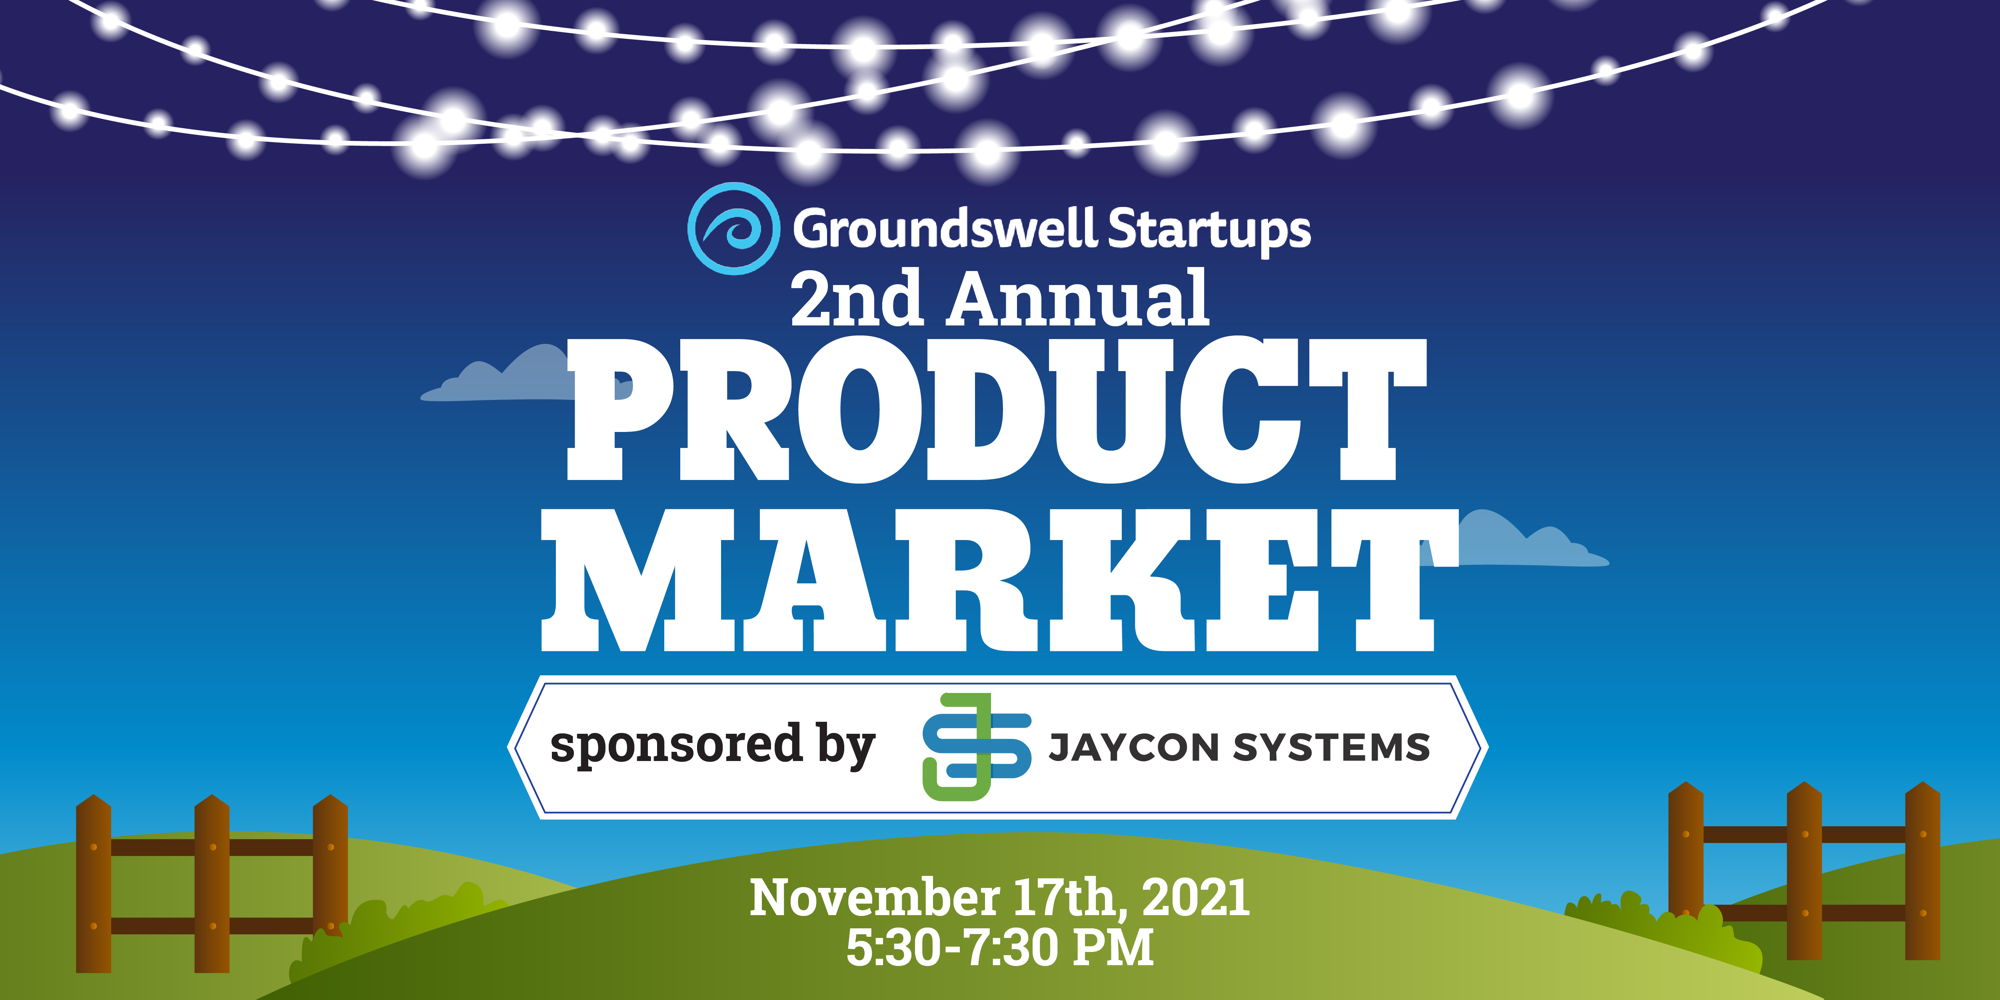 2nd Annual Groundswell Startups Product Market promotional image